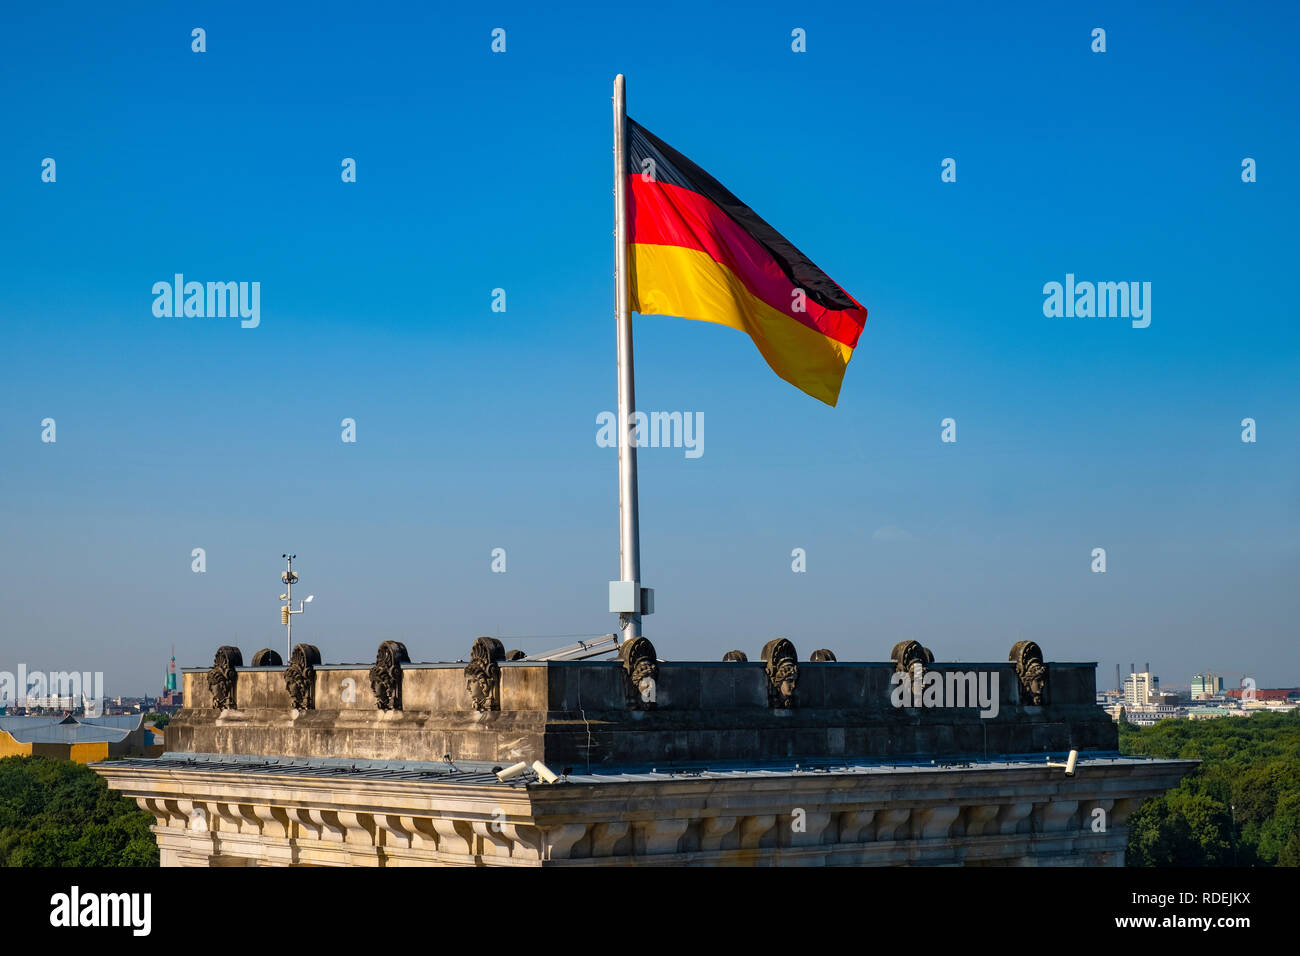 Berlin, Berlin state / Germany - 2018/07/31: Rooftop of the Reichstag building with the historic corner tower and Germany flag with Berlin skyline Stock Photo